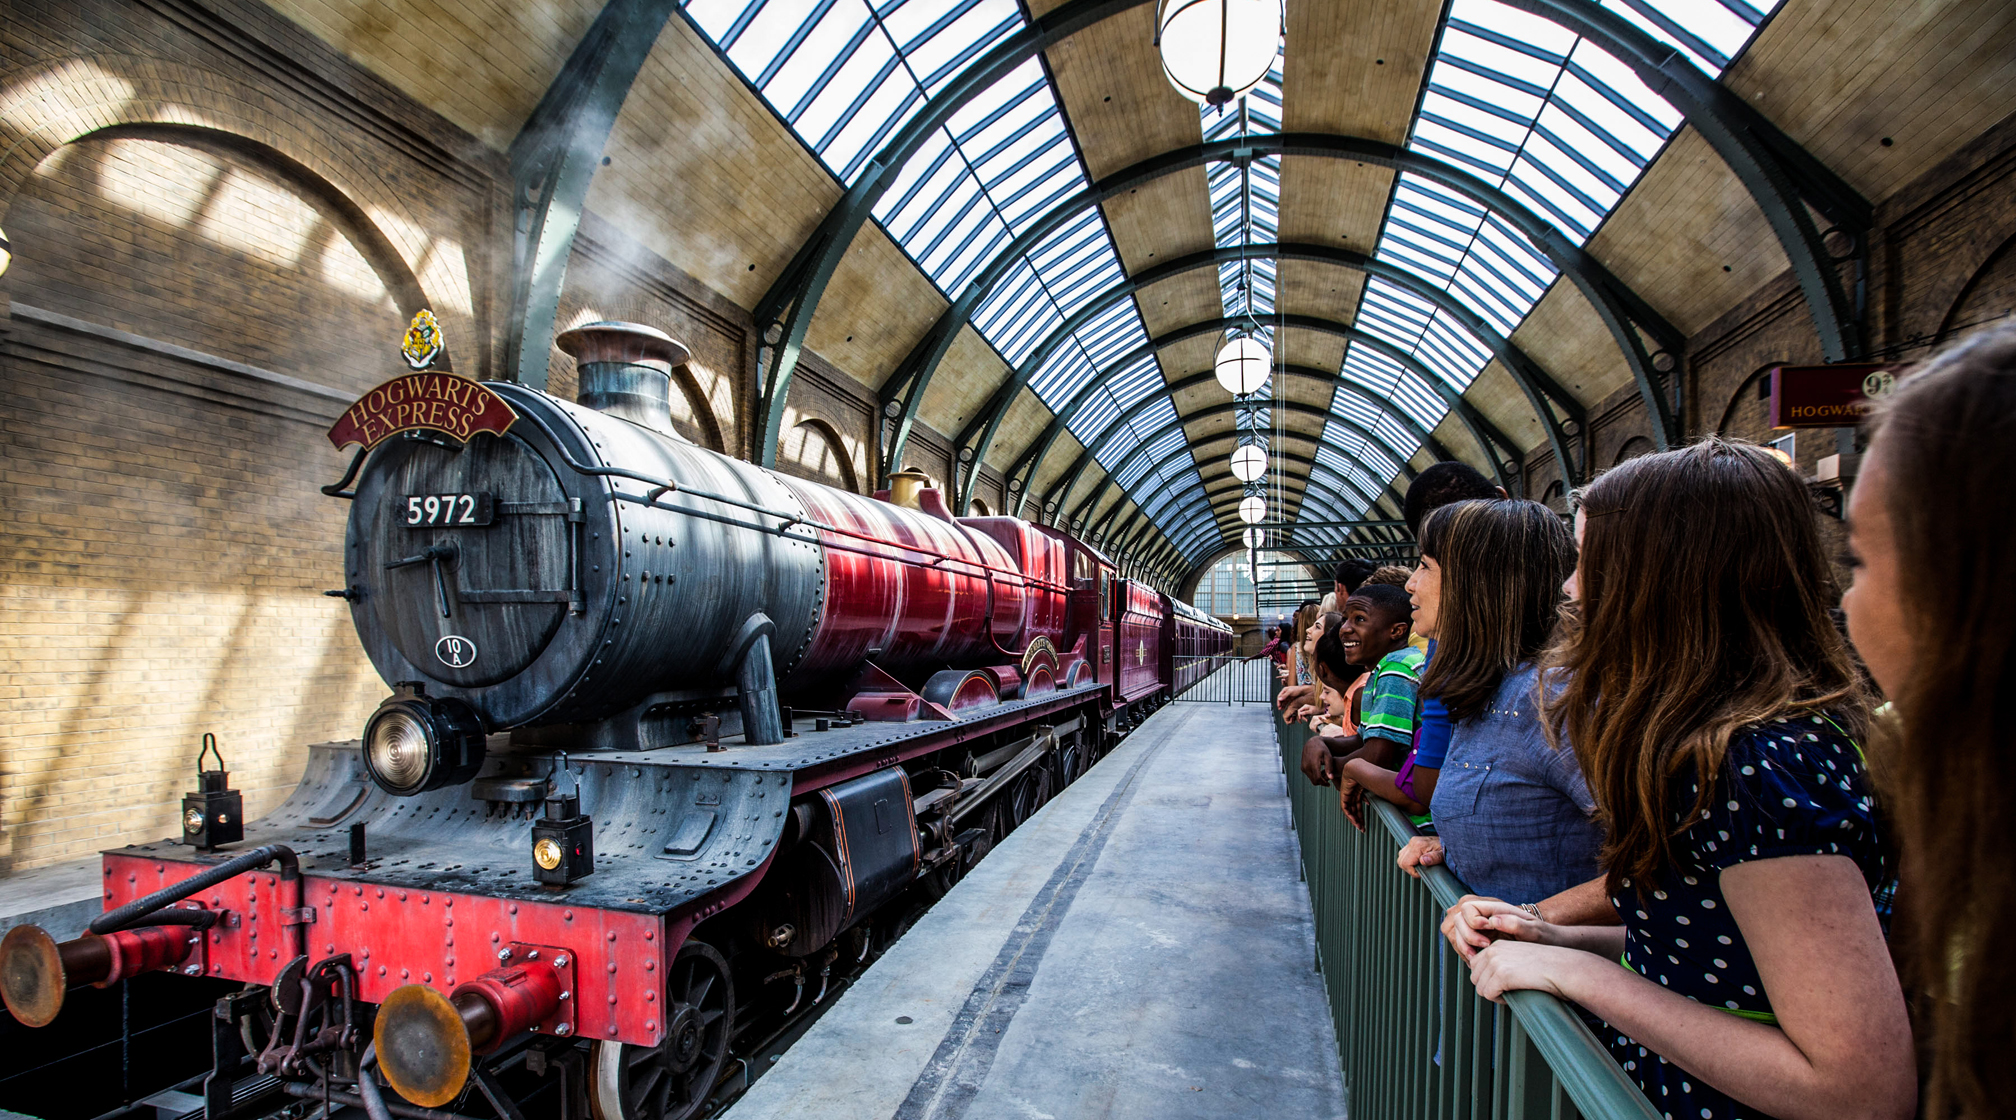 The Wizarding World of Harry Potter - Diagon Alley at Universal Orlando Resort.